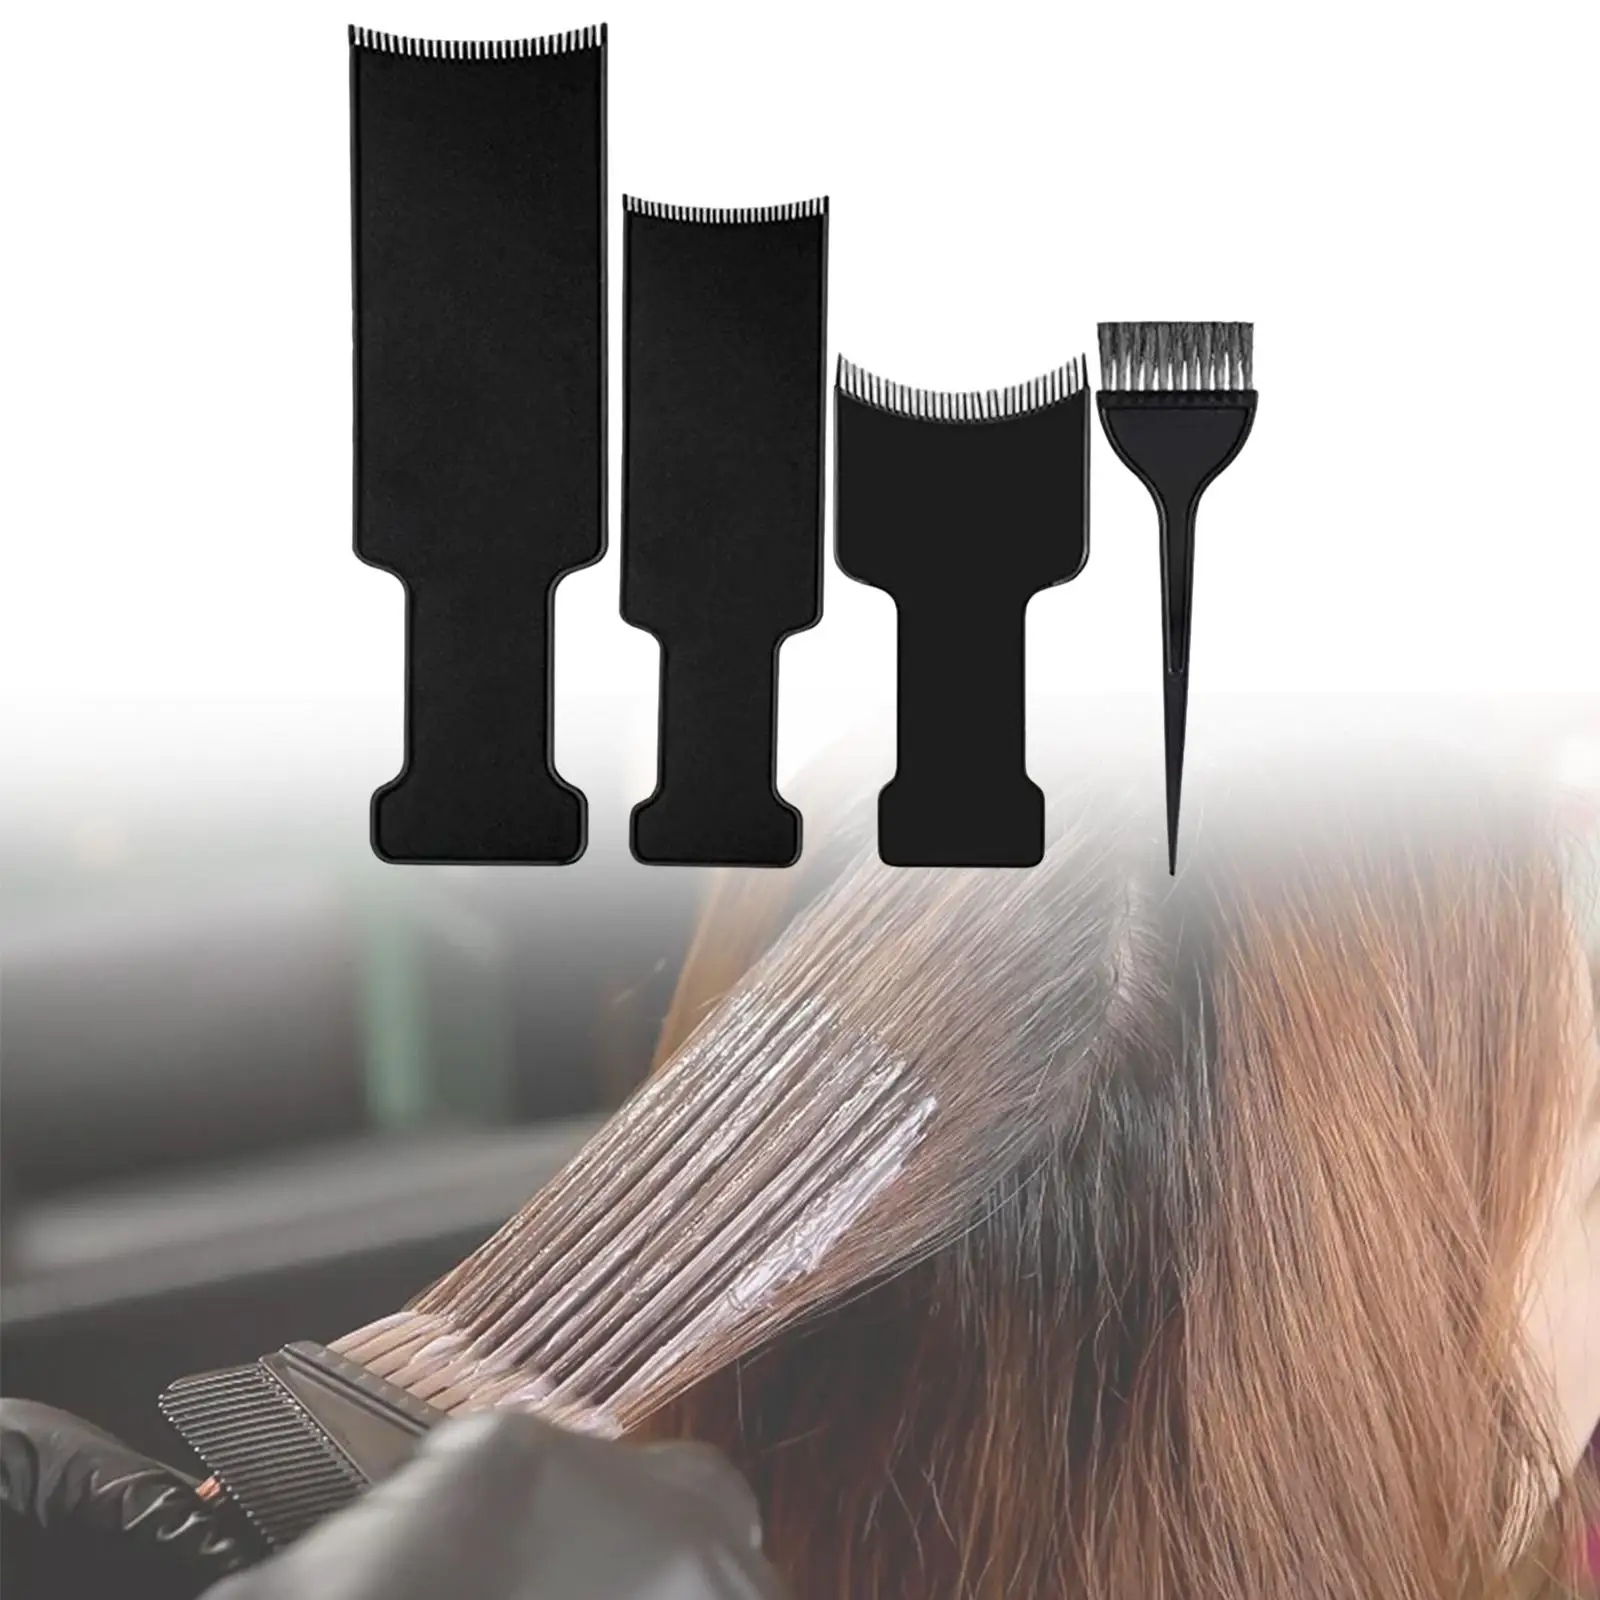 Hair Coloring Board Lightweight Tint DIY Tool Easy to Use Beauty Tool Coloring Comb for Home Highlighting Salon Shop Hairdresser